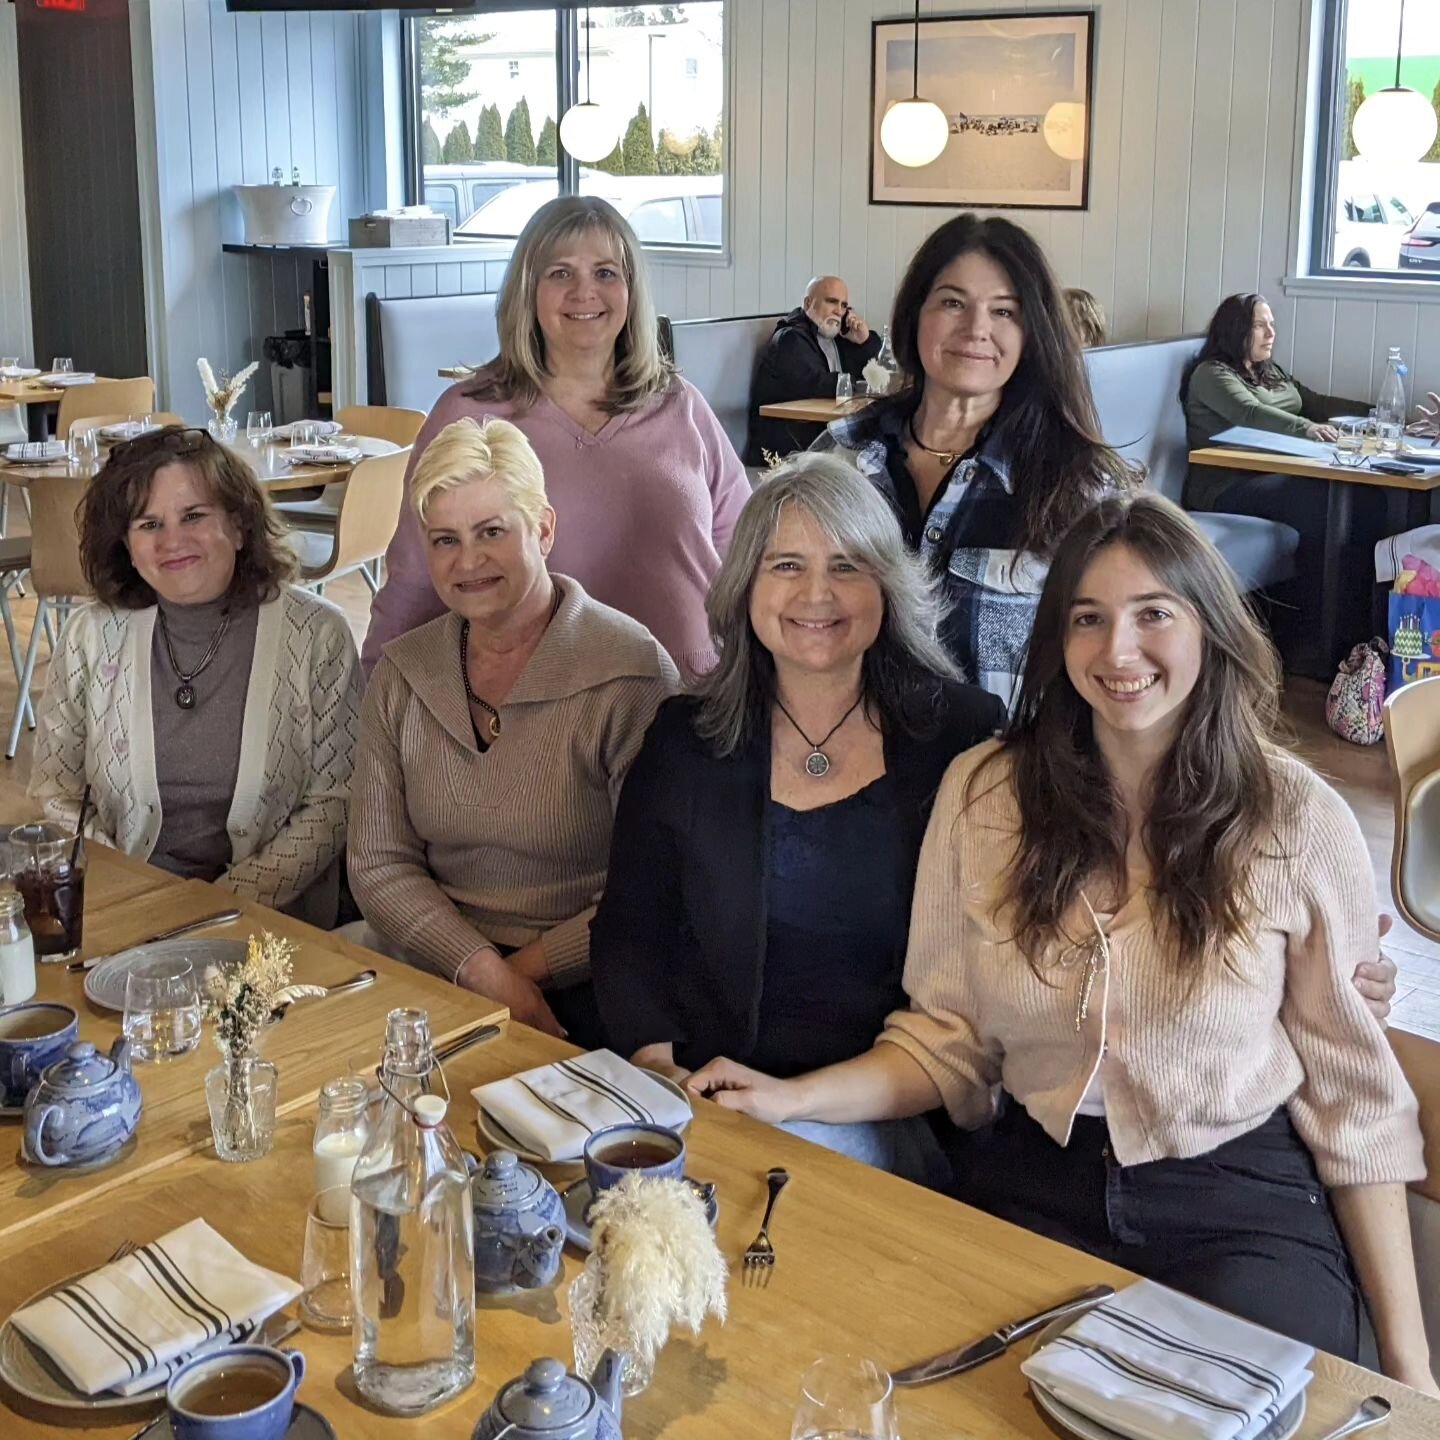 It ain't easy to surprise a thriller and mystery author (we are a suspicious lot!), but my beautiful daughter did just that with a surprise birthday brunch with these wonderful women this morning! The one thing I've learned over the years is how valu